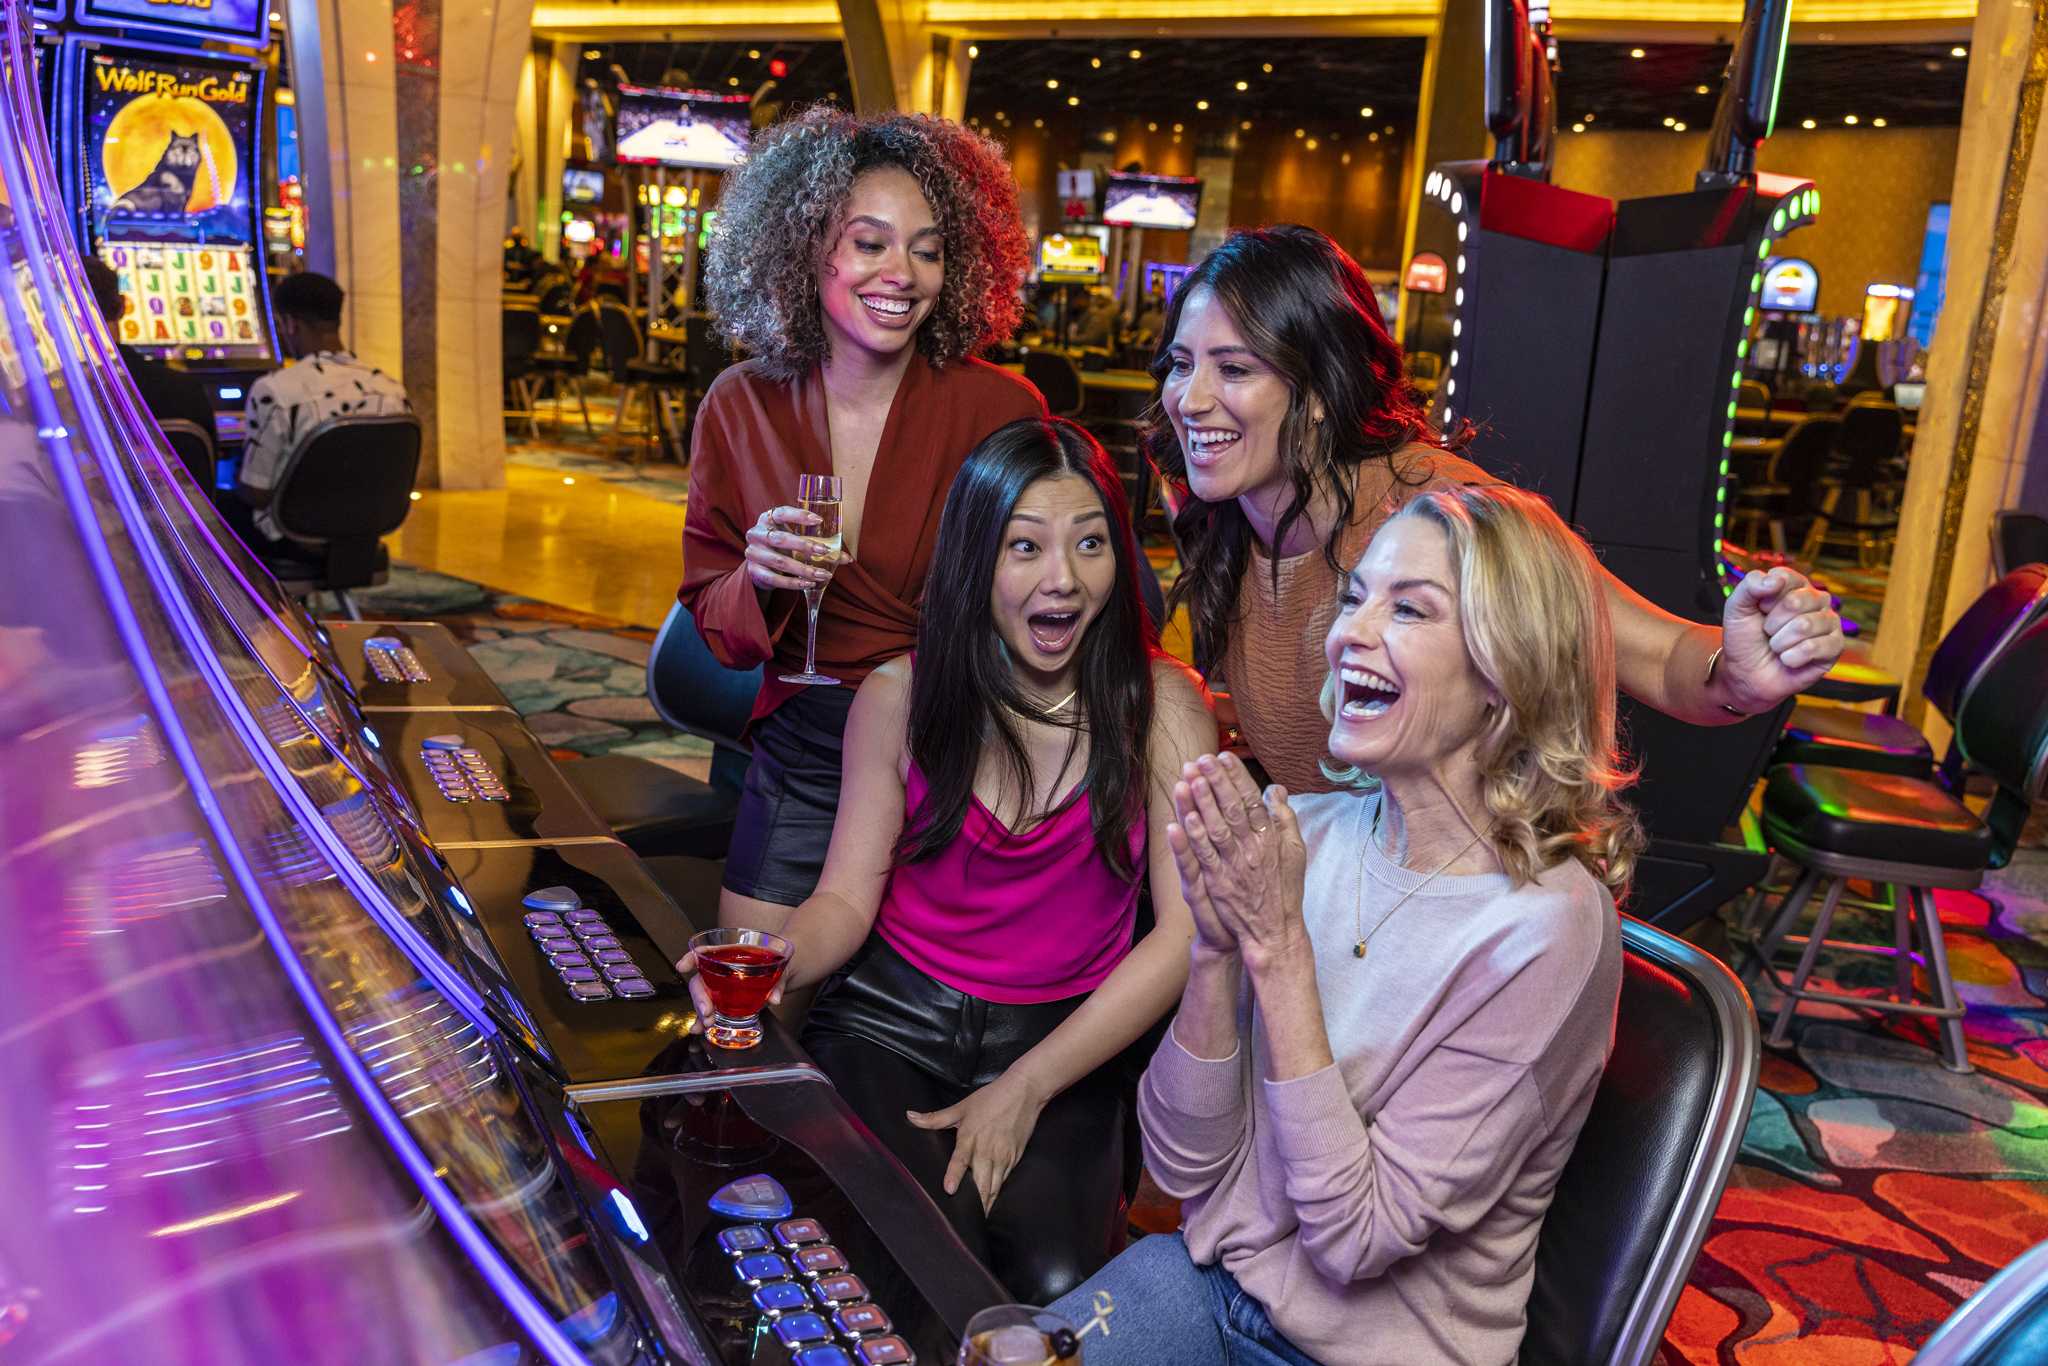 A few friends having a good time playing Slot Machines.